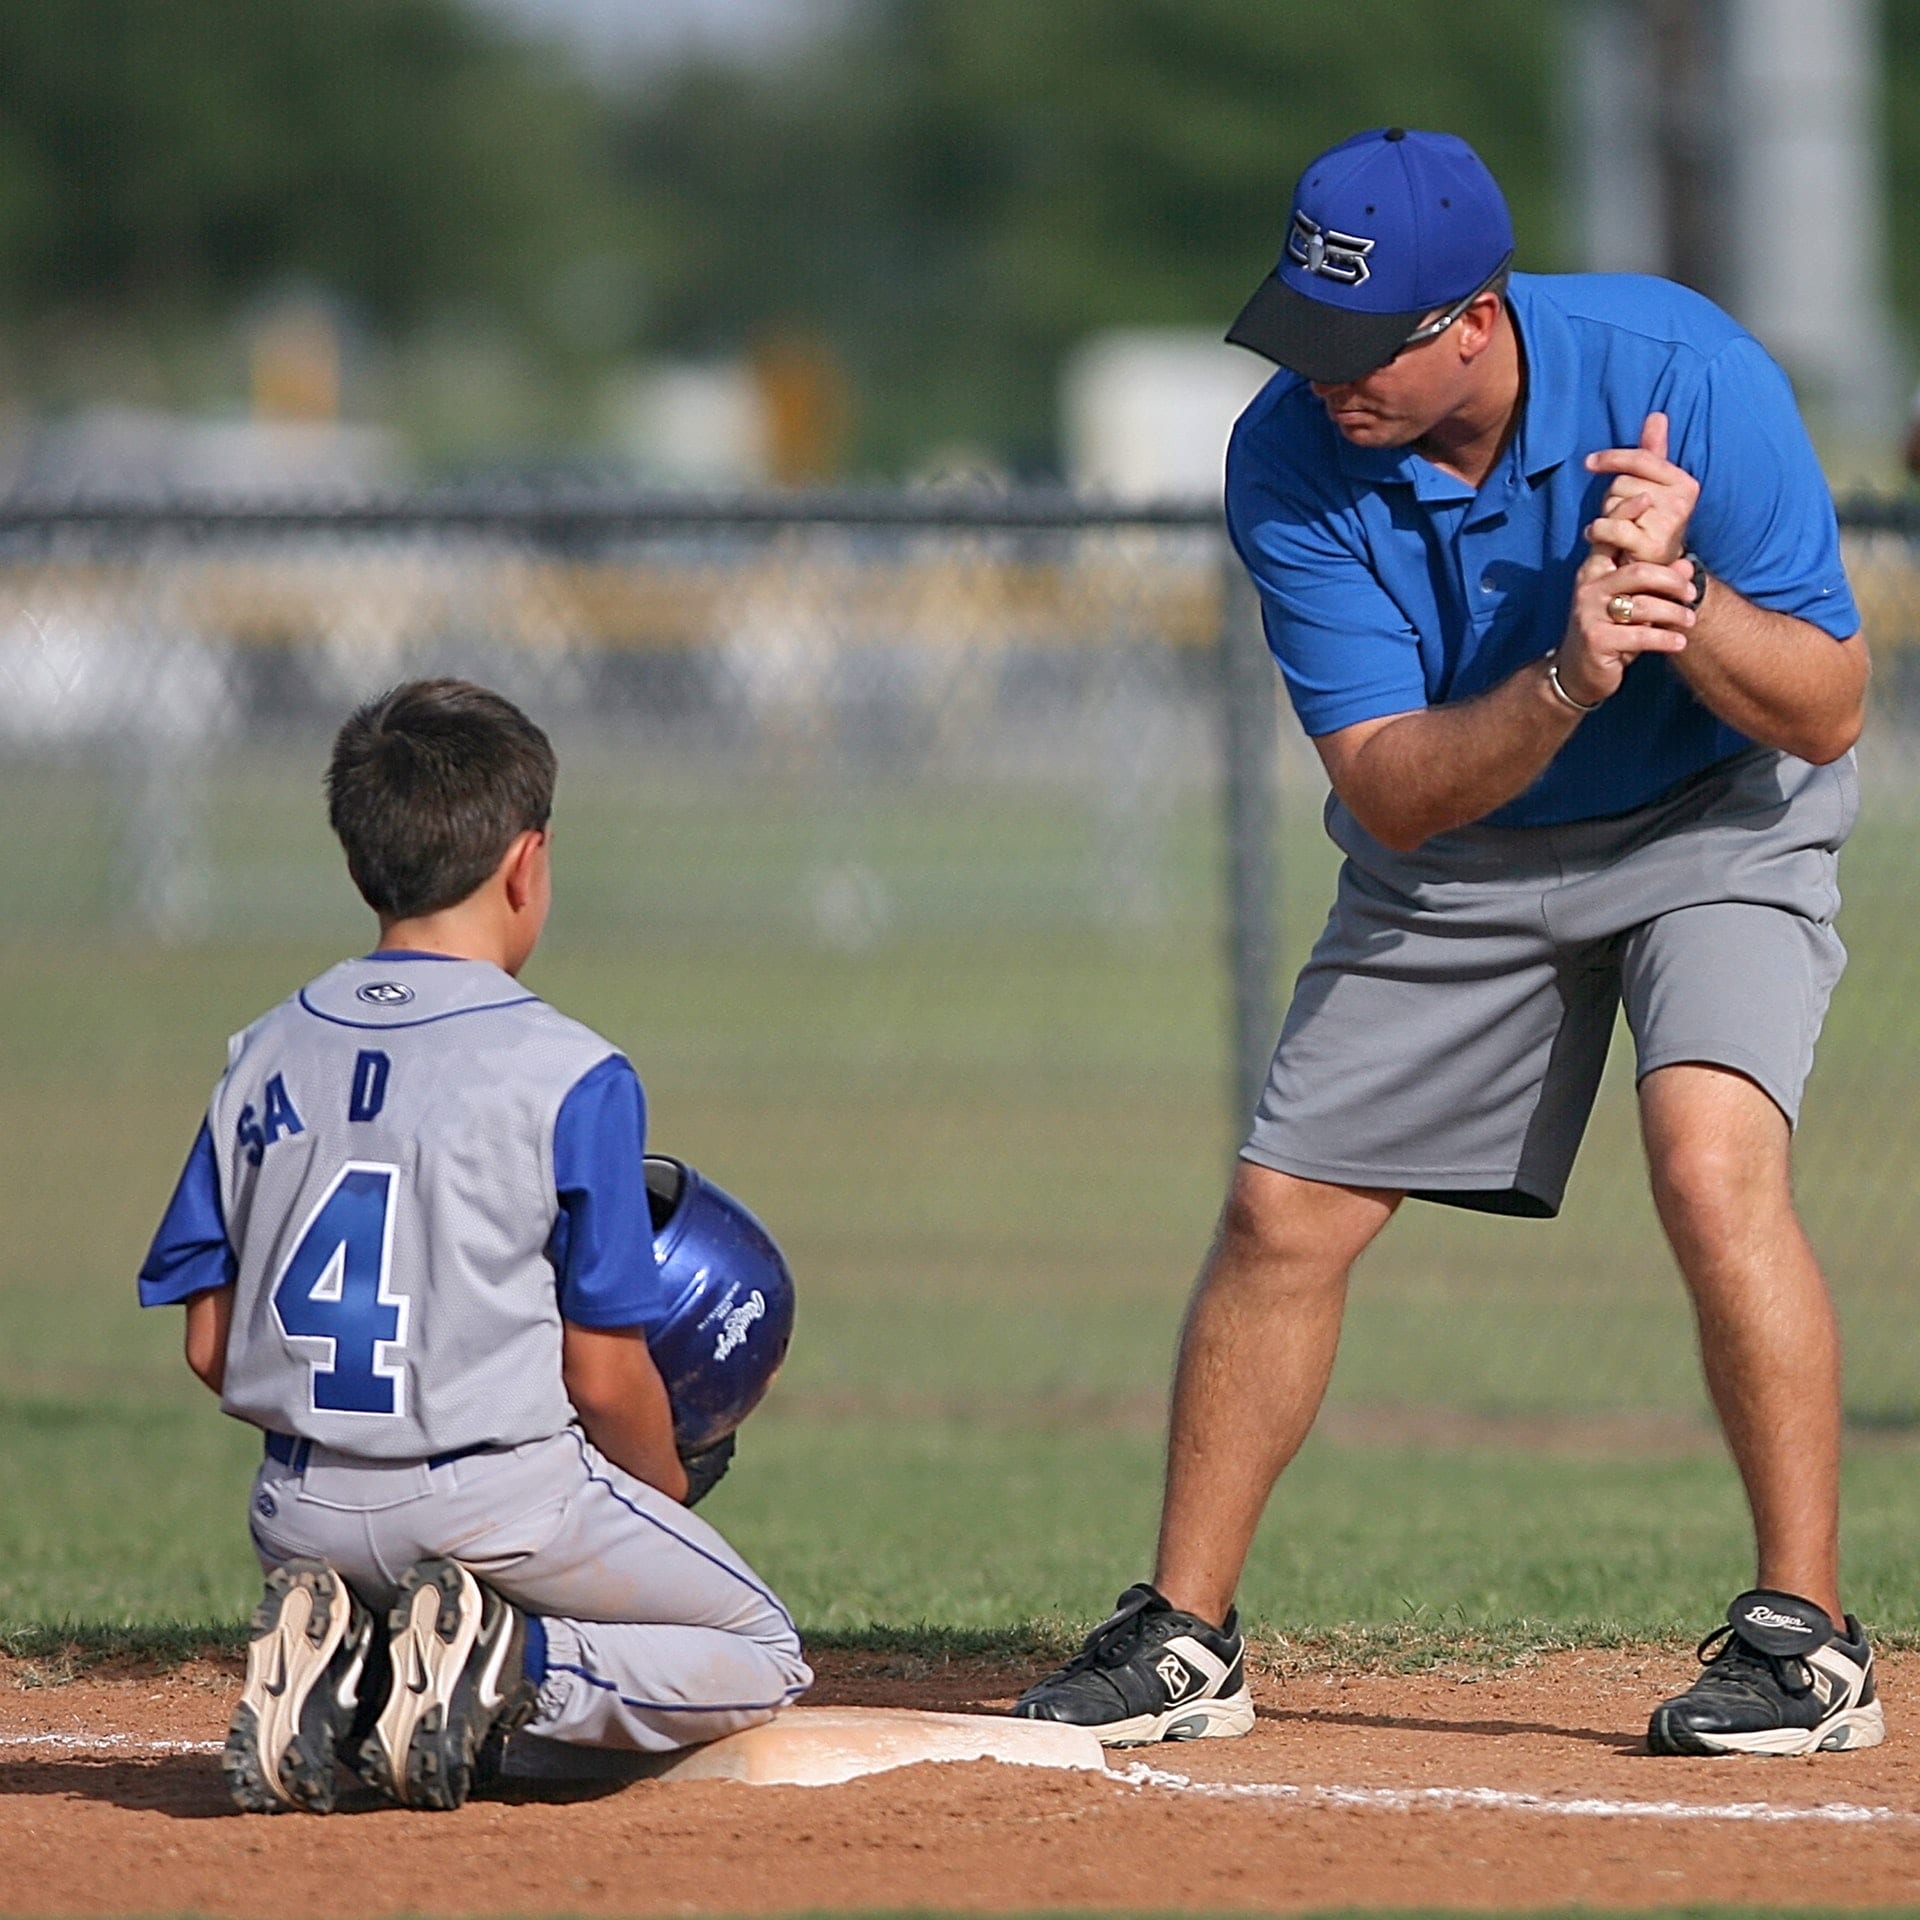 365 Days to Better Baseball - Coaching Tip of the Day